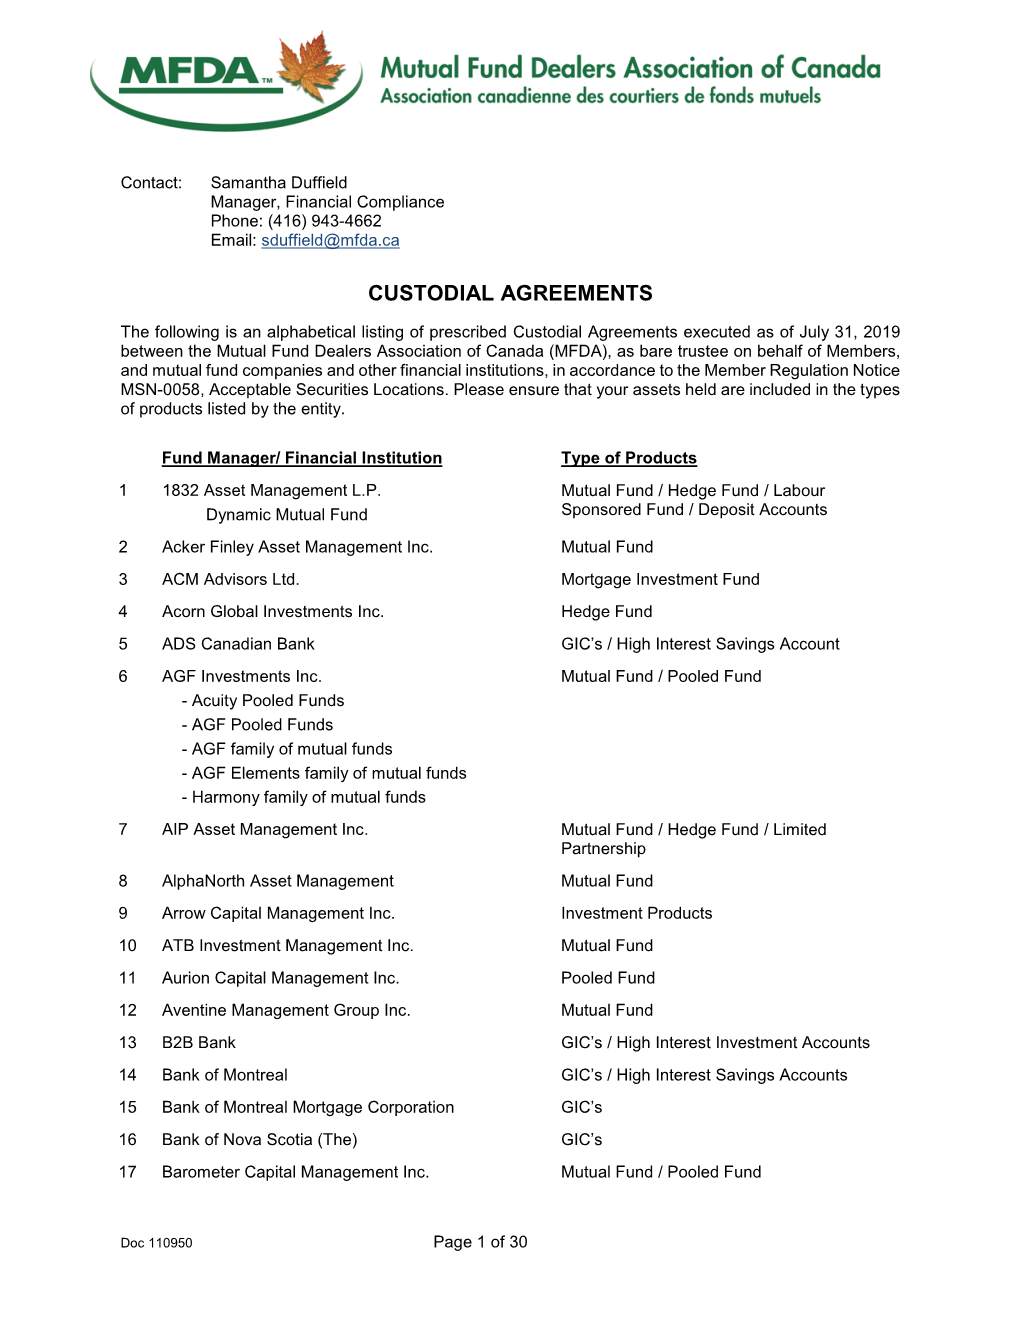 Custodial Agreement Listing As at July 31, 2019